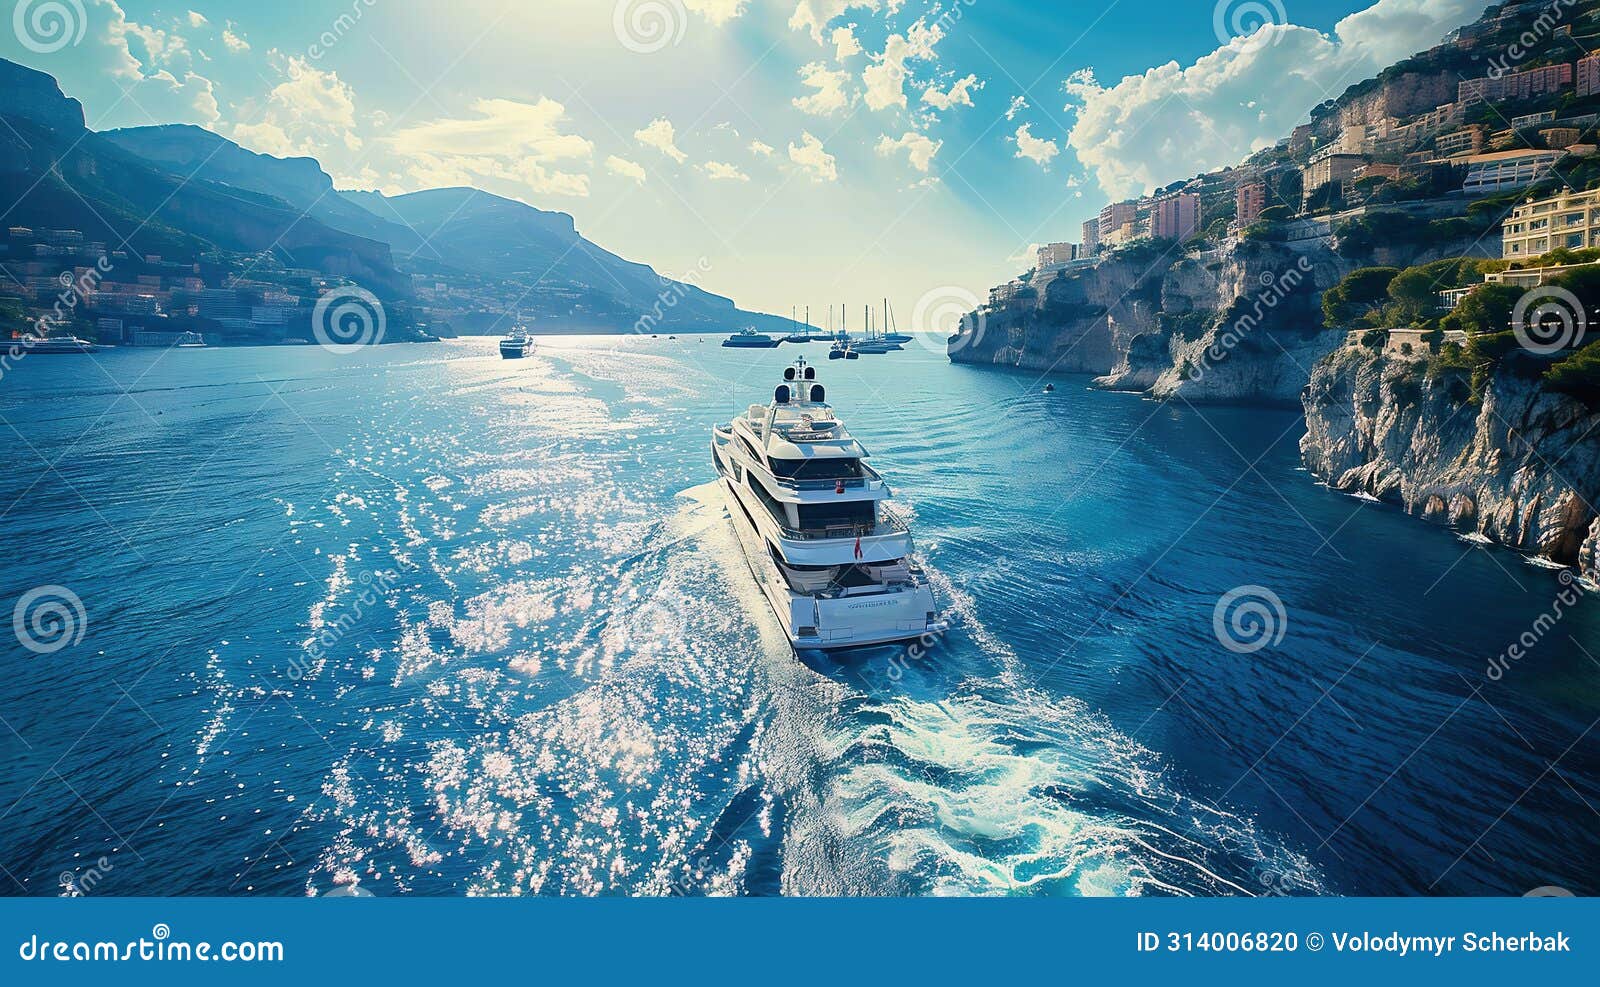 yacht making its grand entrance into monaco, surrounded by sparkling waters, under the bright morning sun